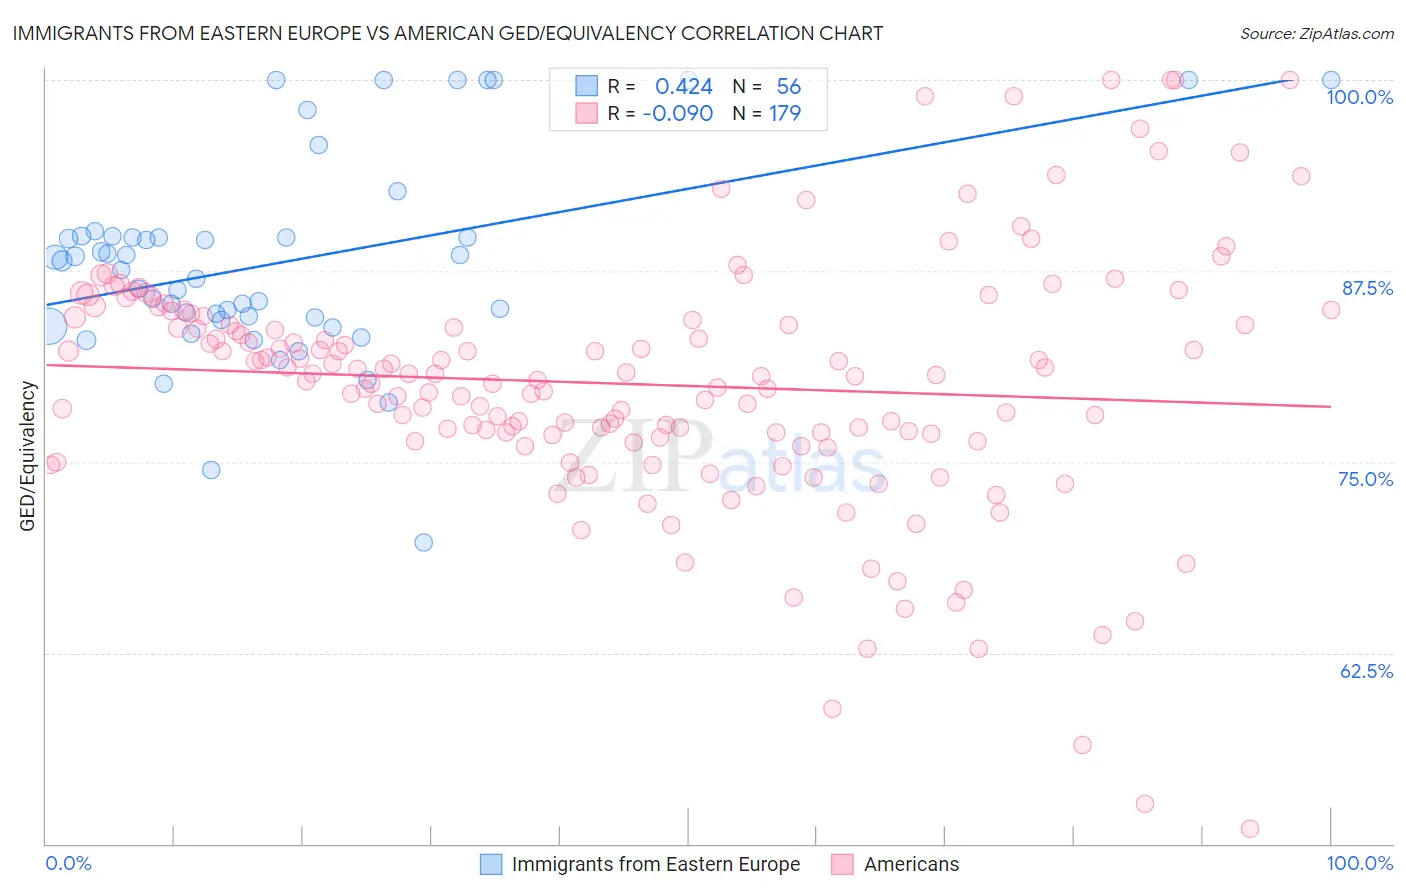 Immigrants from Eastern Europe vs American GED/Equivalency